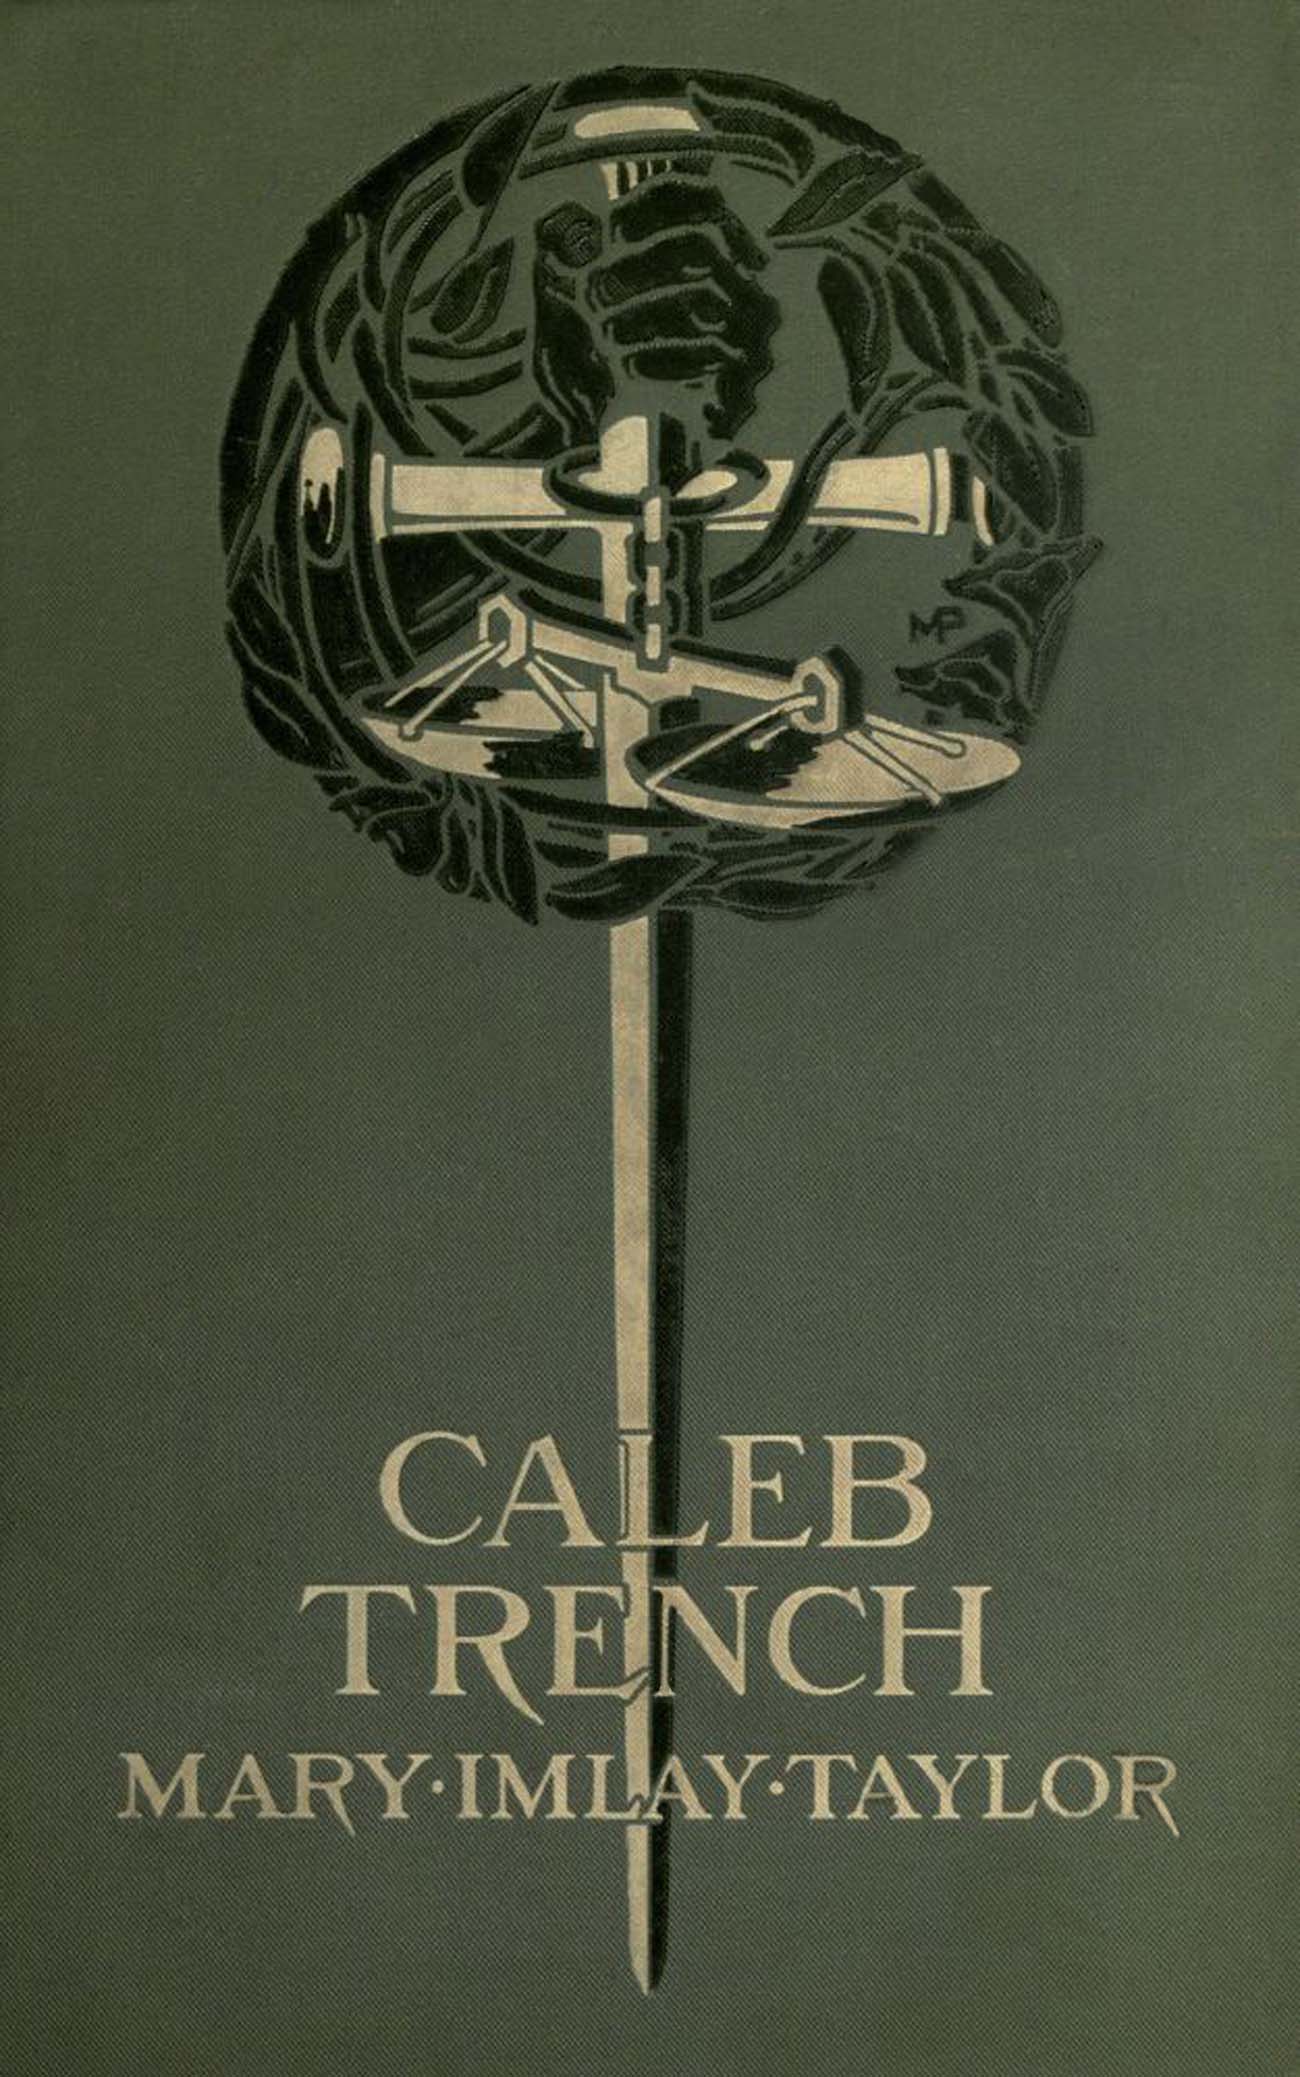 Caleb Trench, by Mary Imlay Taylor—A Project Gutenberg eBook